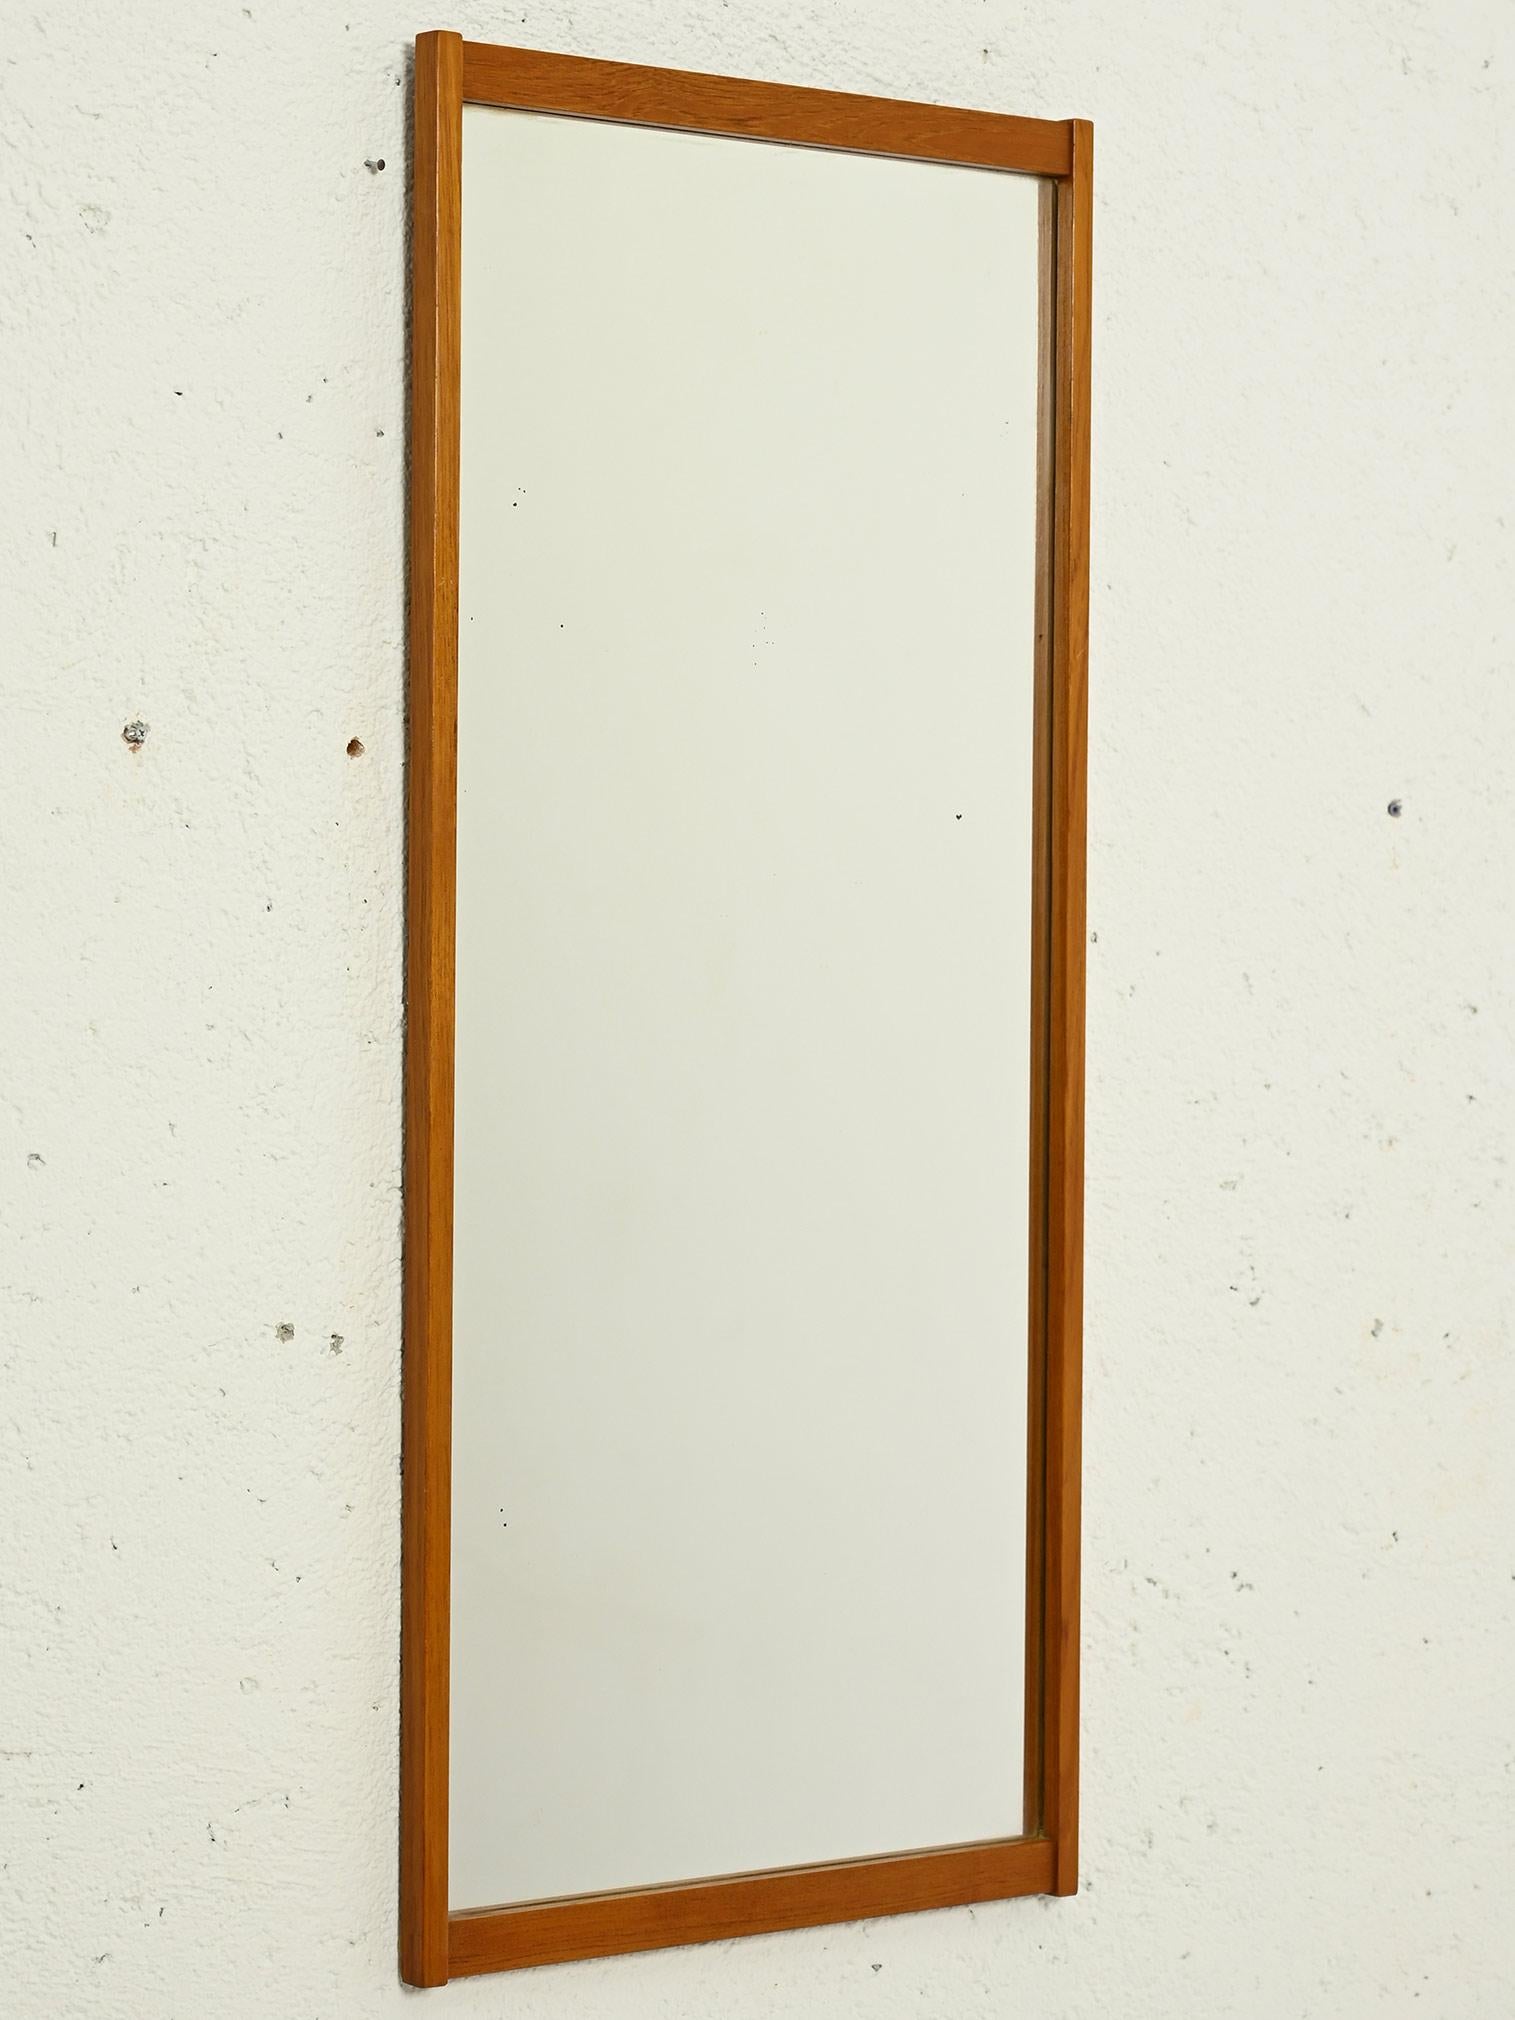 1960s modernist mirror.

Scandinavian mirror with a simple, minimalist design and teak wood frame. Its clean lines highlight a Nordic style that lends a distinctive elegance. With its classic design, this mirror fits easily into any room, adding a